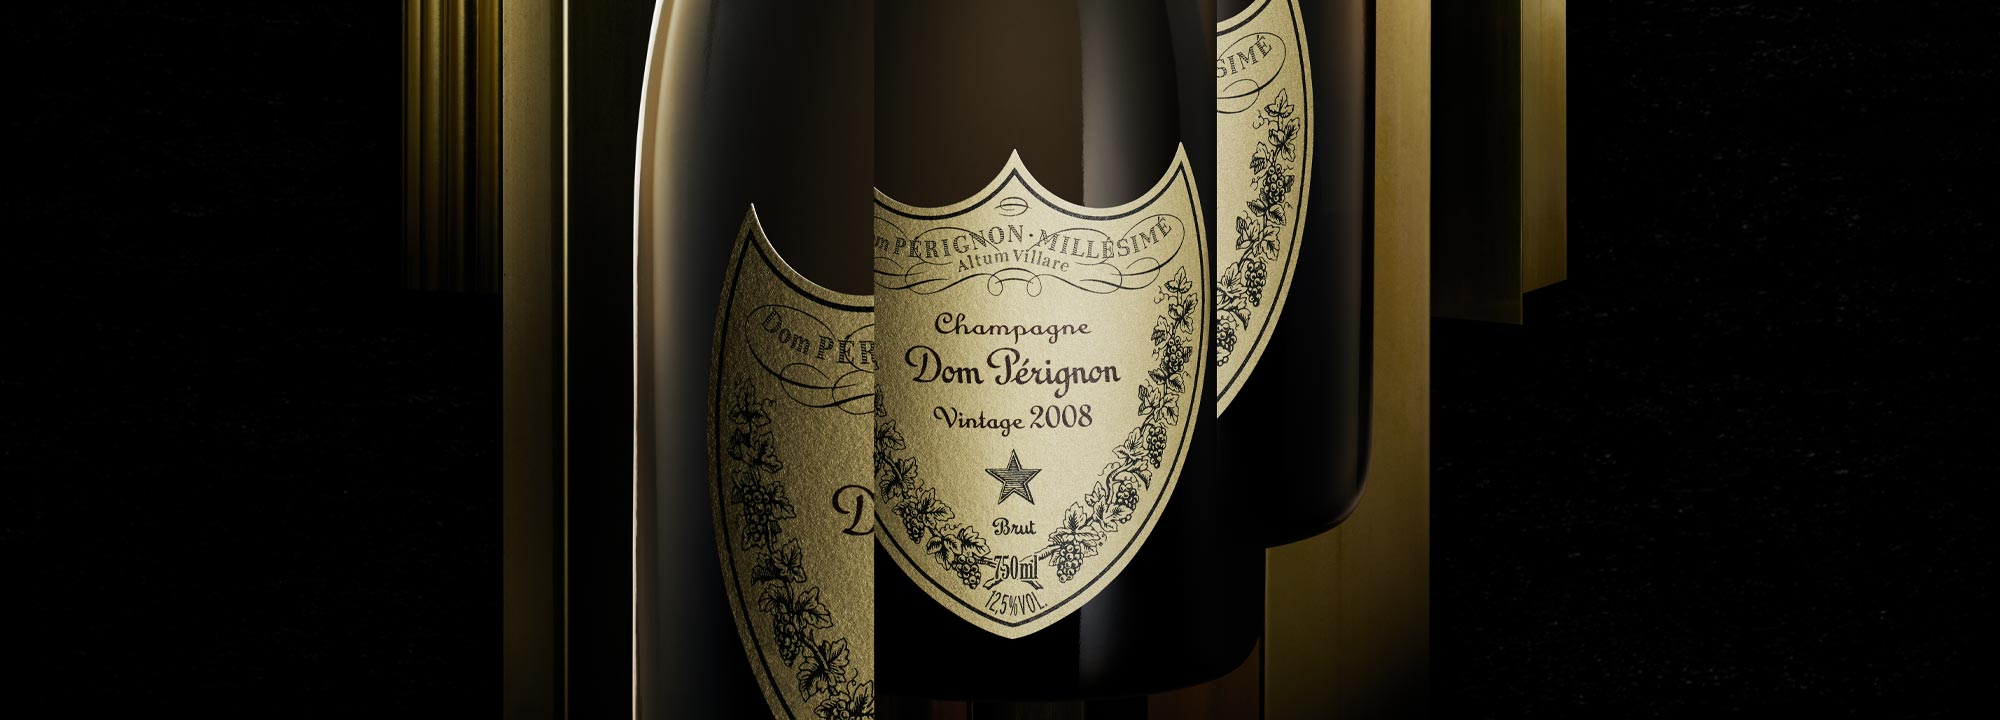 New Release: Dom Pérignon 2008 - Buy Champagne same day 3 hour